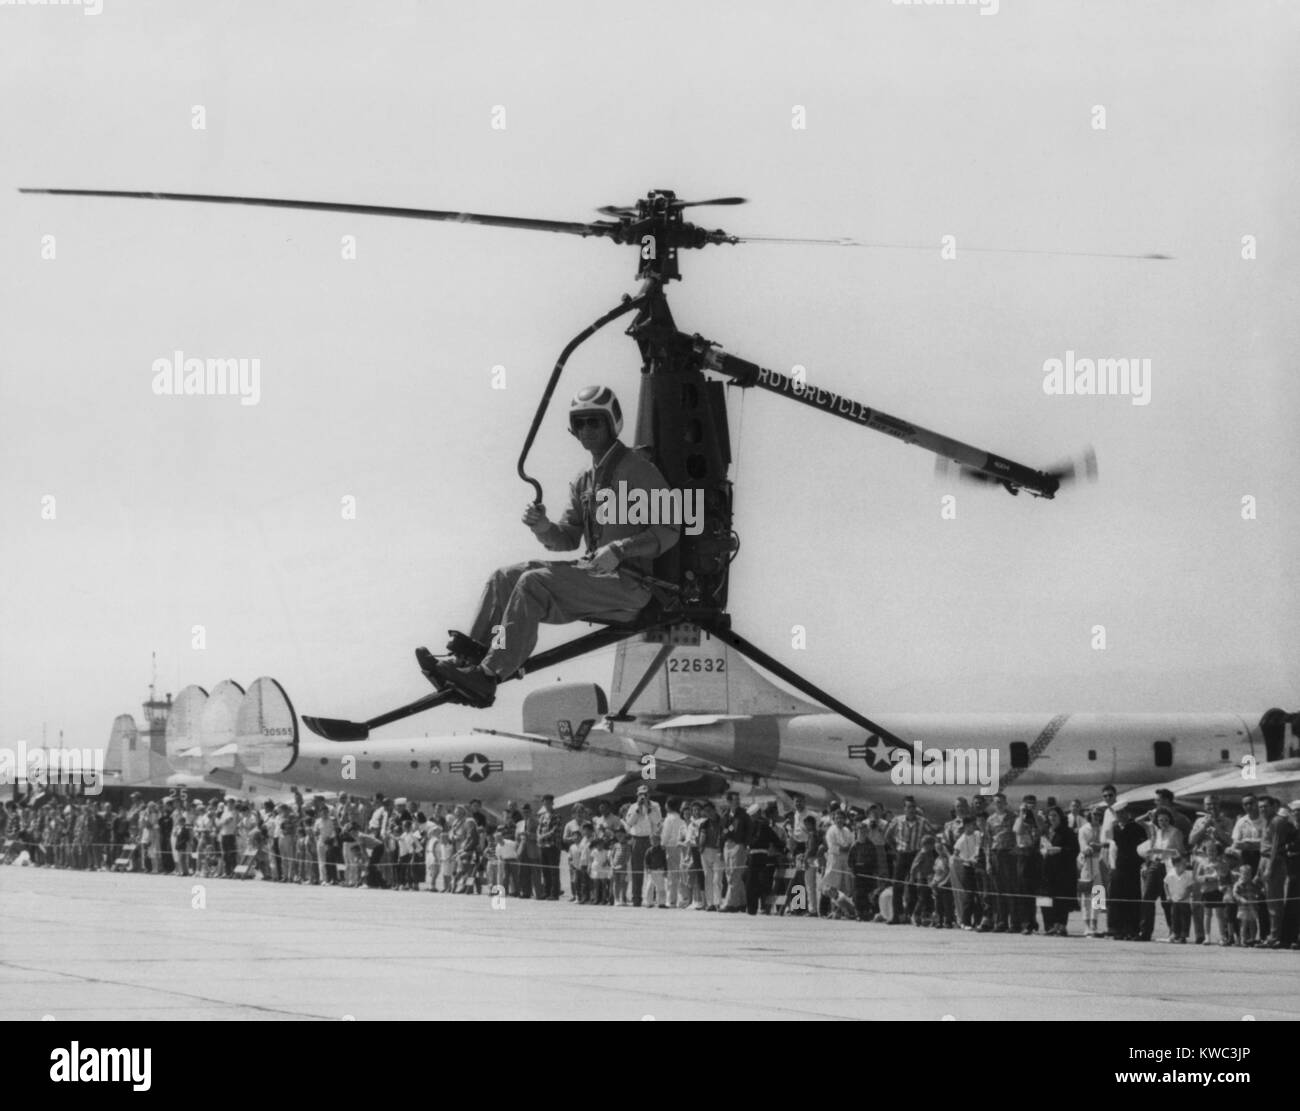 Rotocycle, 250-pound collapsible, one-man helicopter in demonstration flight in 1957-58. It was developed for the Marines to use for observation, liaison, and maneuvers. The Marines rejected it because of its slow speed of 52 mph, minimal range of 40 miles, vulnerability to small-arms fire, and the lack of visual references on the structure causing the pilot spatial disorientation. (BSLOC 2015 14 124) Stock Photo